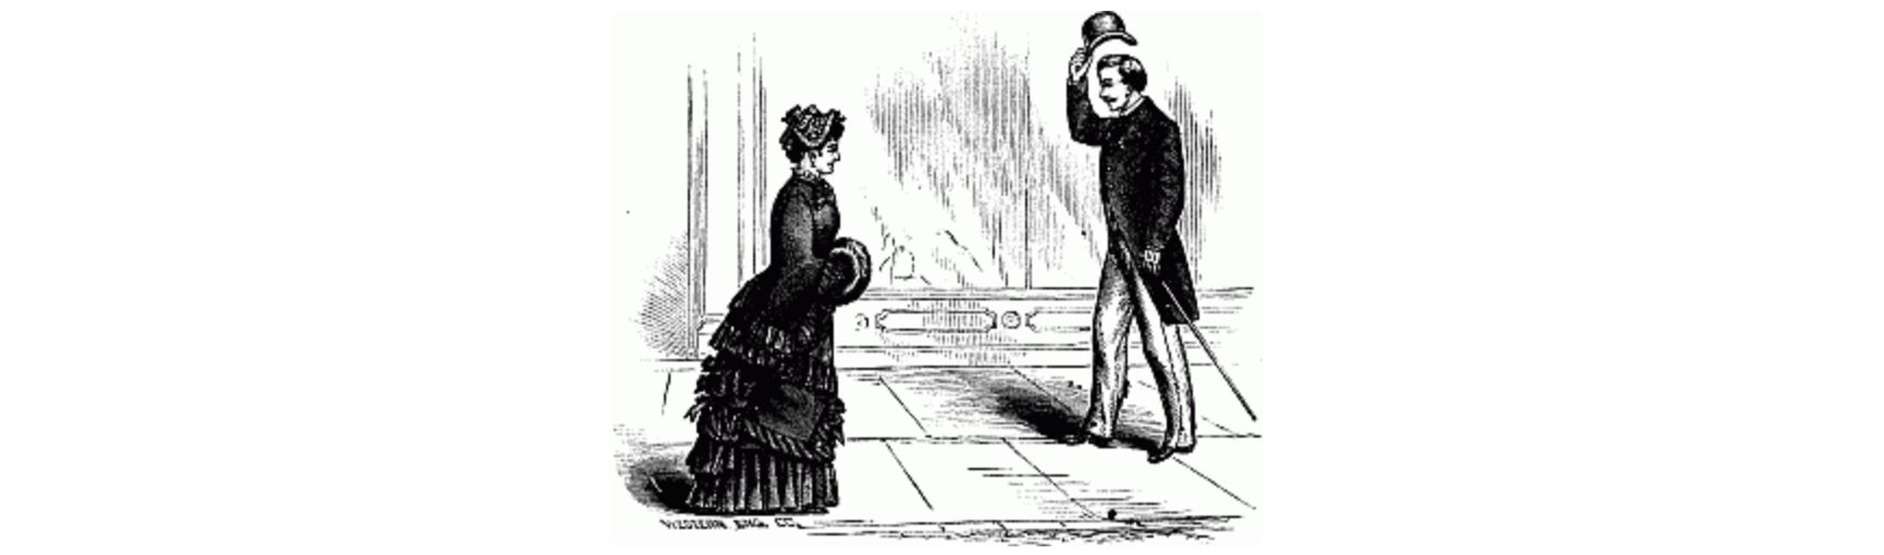 How to master the art of conversation like a vintage gentleman—from a manual on manners from the 1880s